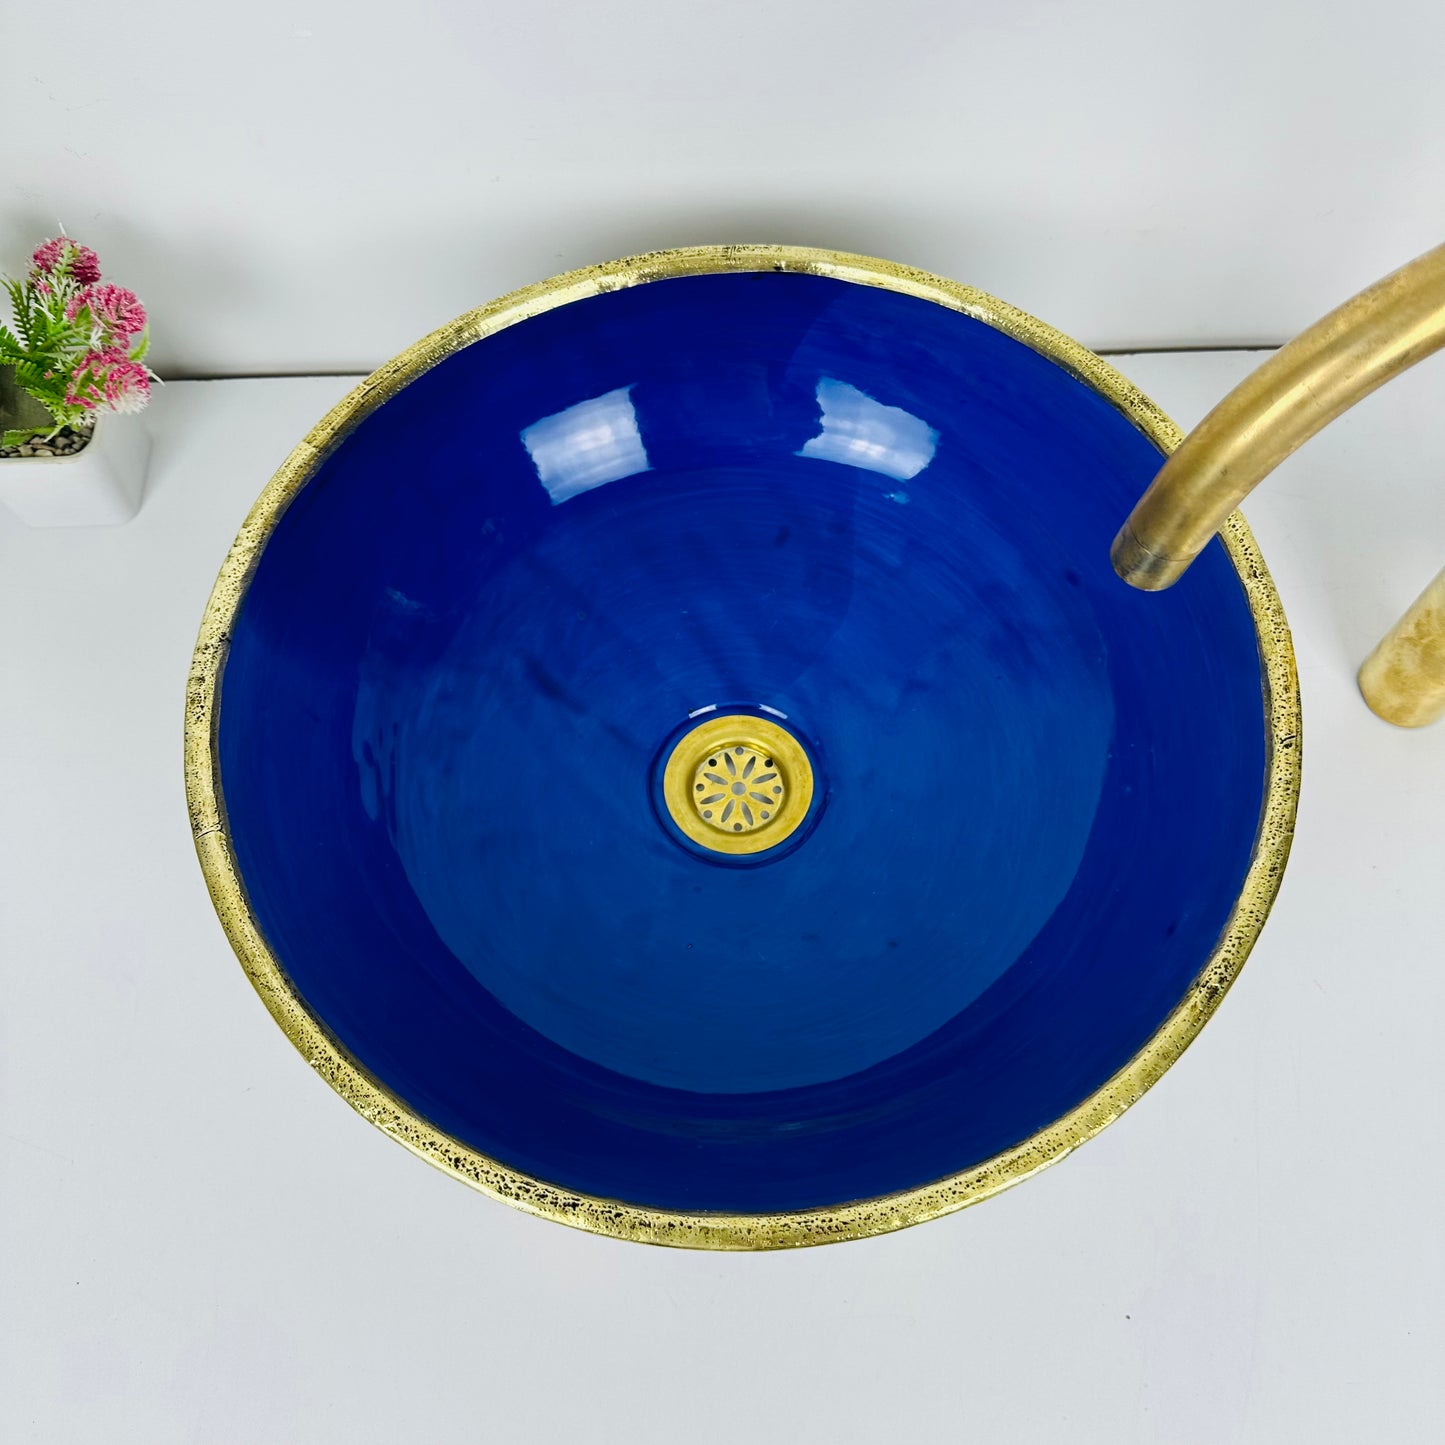 Sapphire Majesty: Handcrafted Ceramic Sink with Dark Blue and Gold Brass Accent